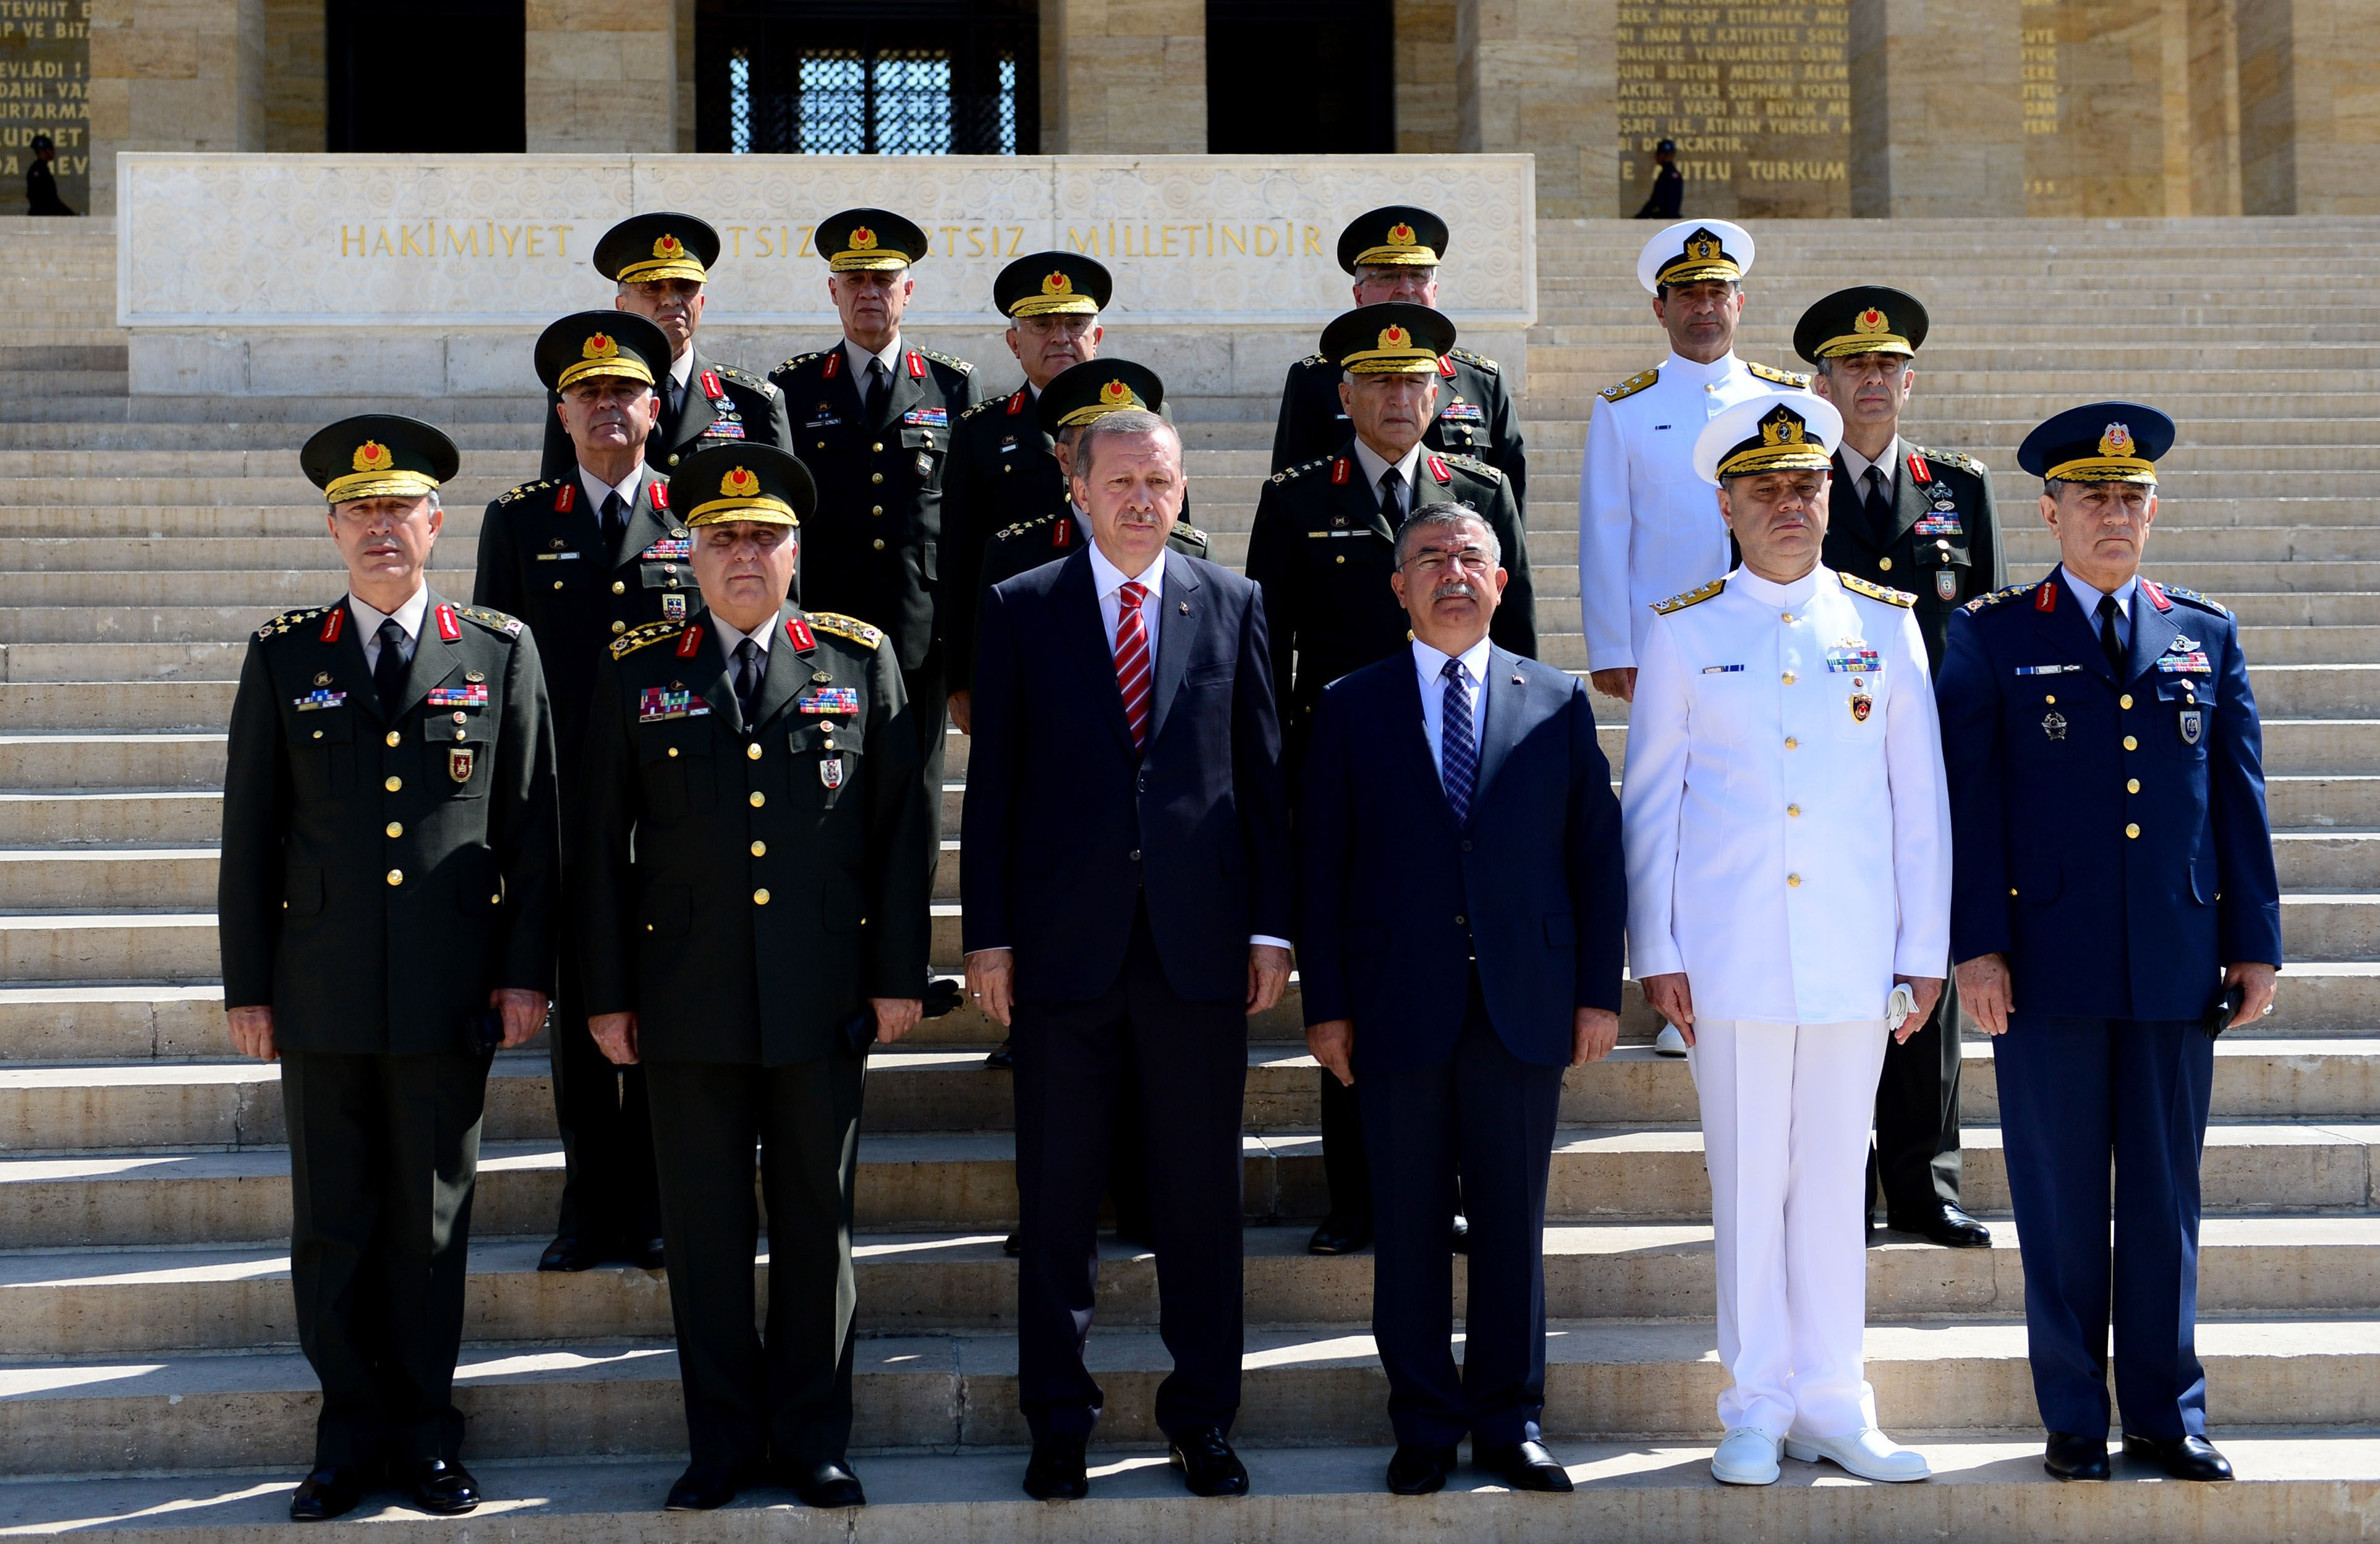 Prime Minister Recep Tayyip Erdogan (third from the front left) and General Akin Ozturk (front right) pictured with members of the Supreme Military Council in Ankara, Turkey on August 4, 2014. (Anadolu Agency—Getty Images)